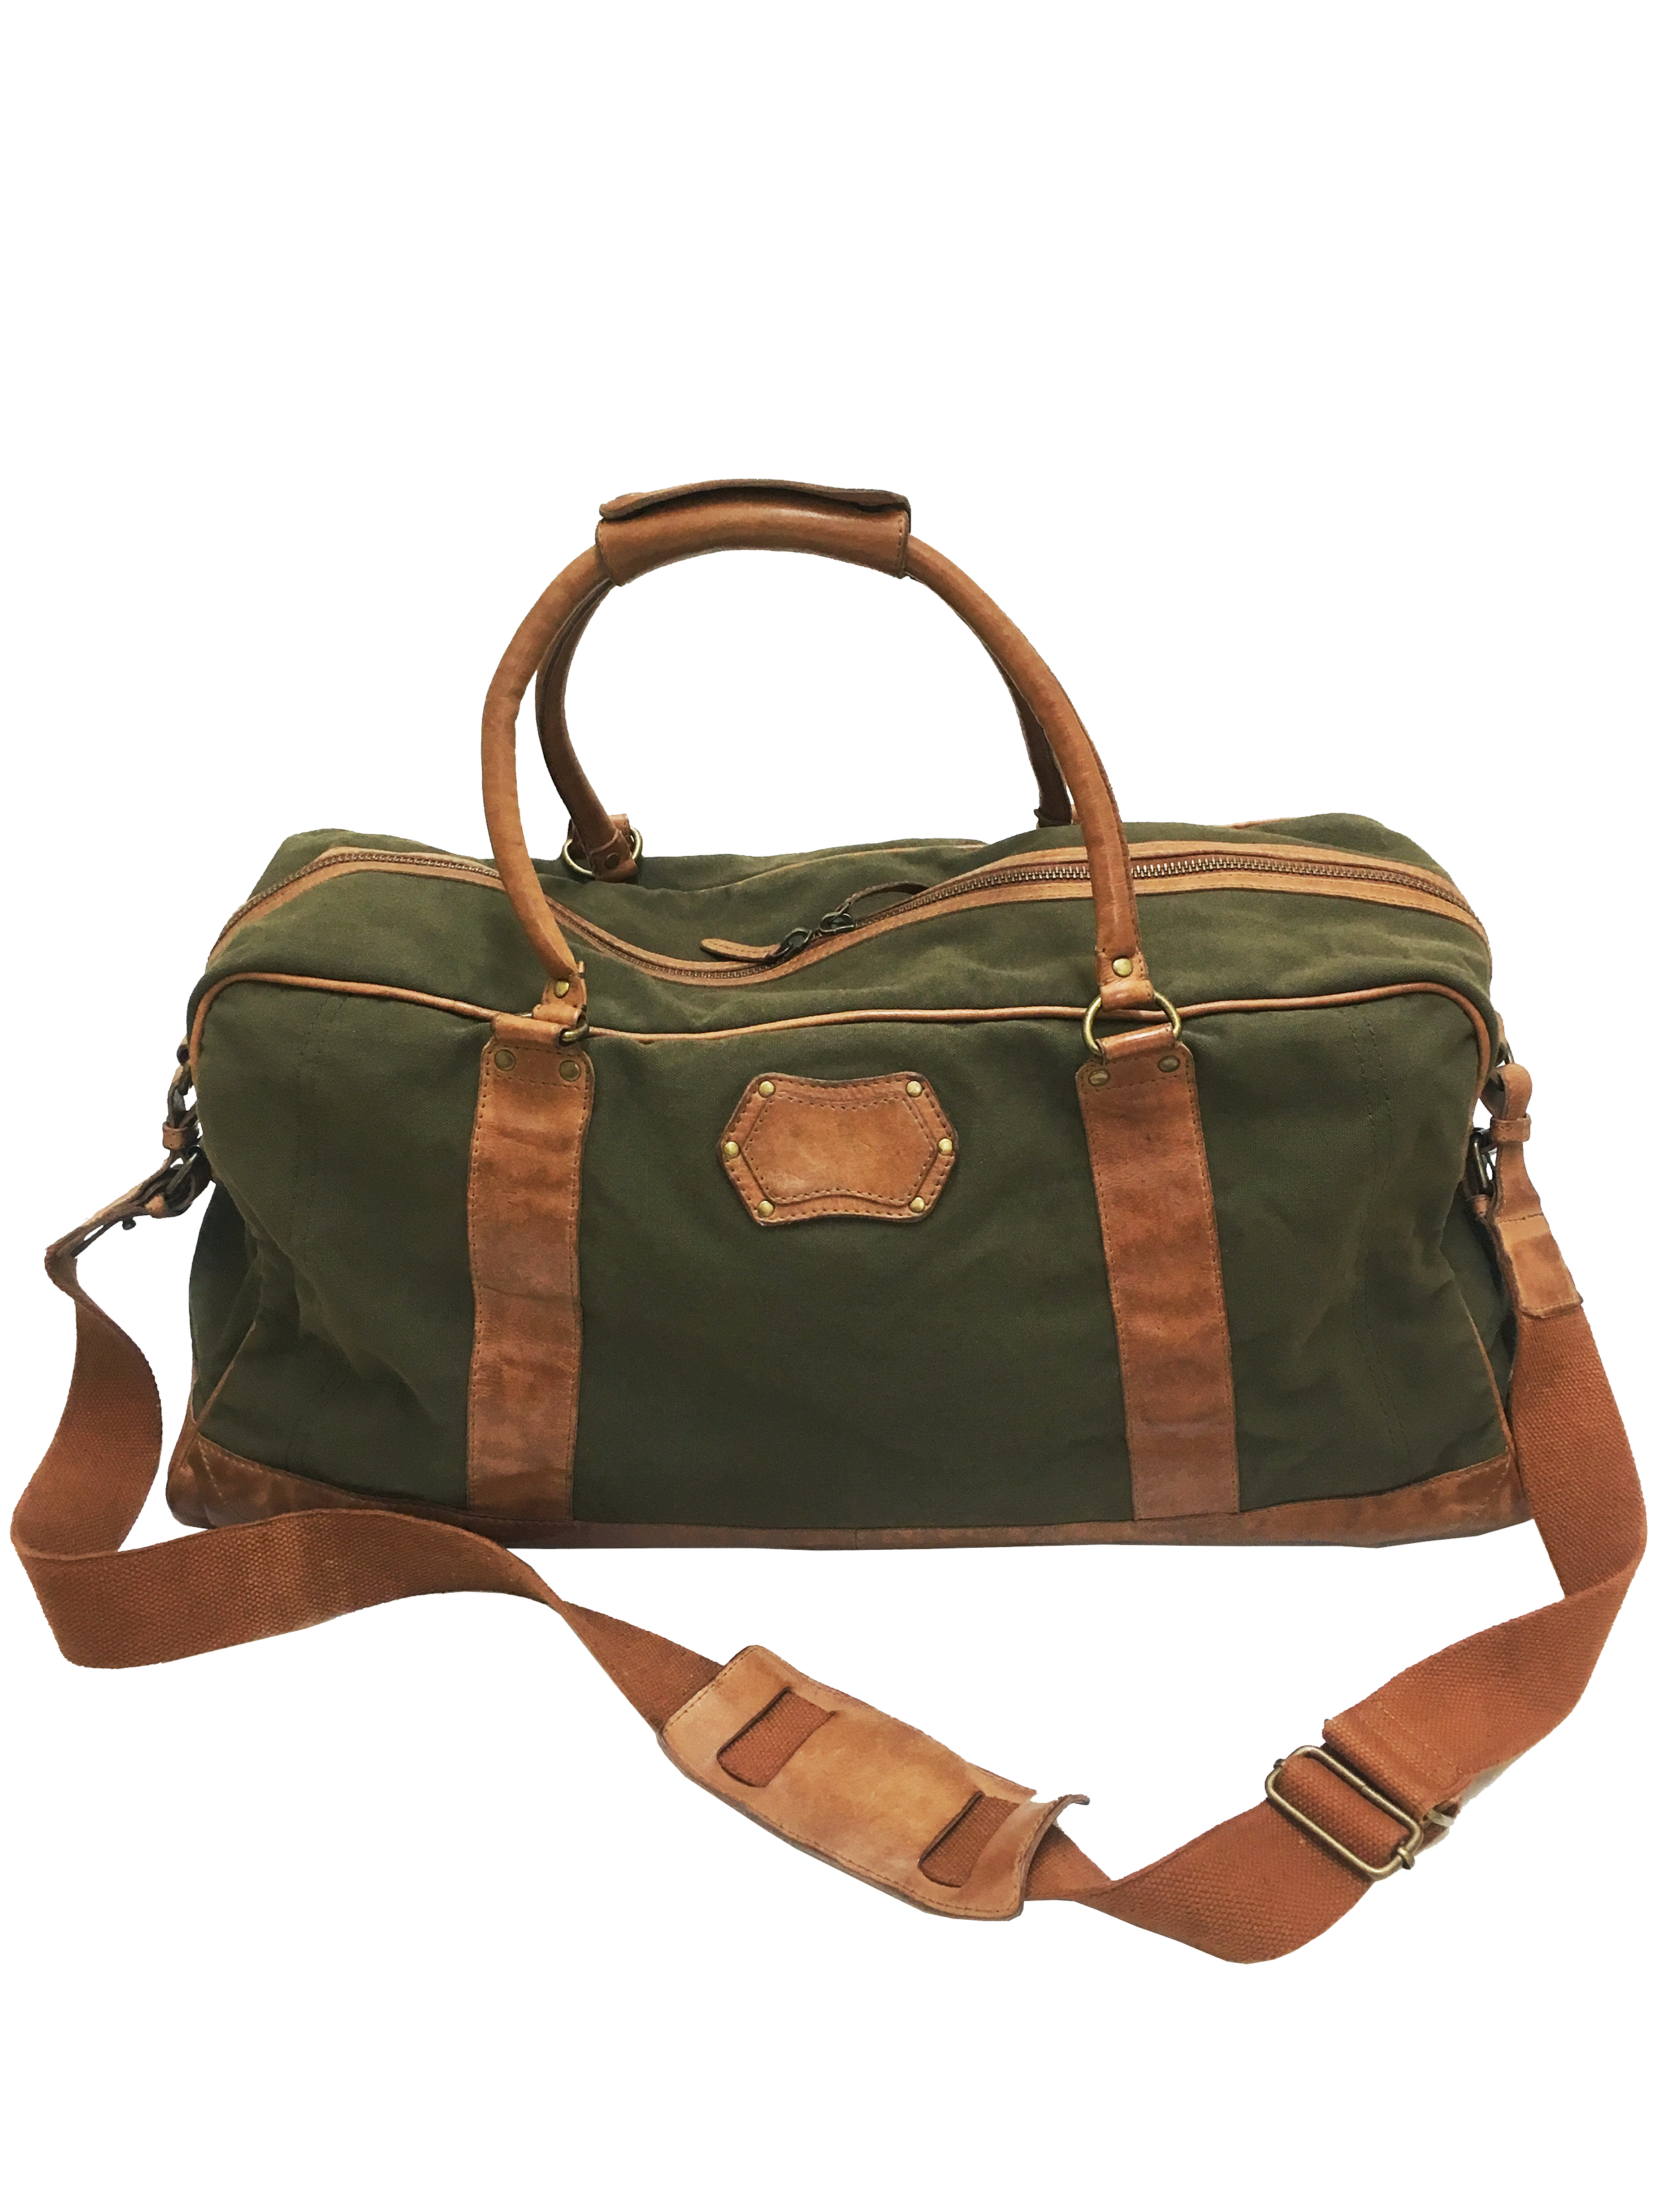 weekender, duffelbag, travel bag in waxed canvas and leather